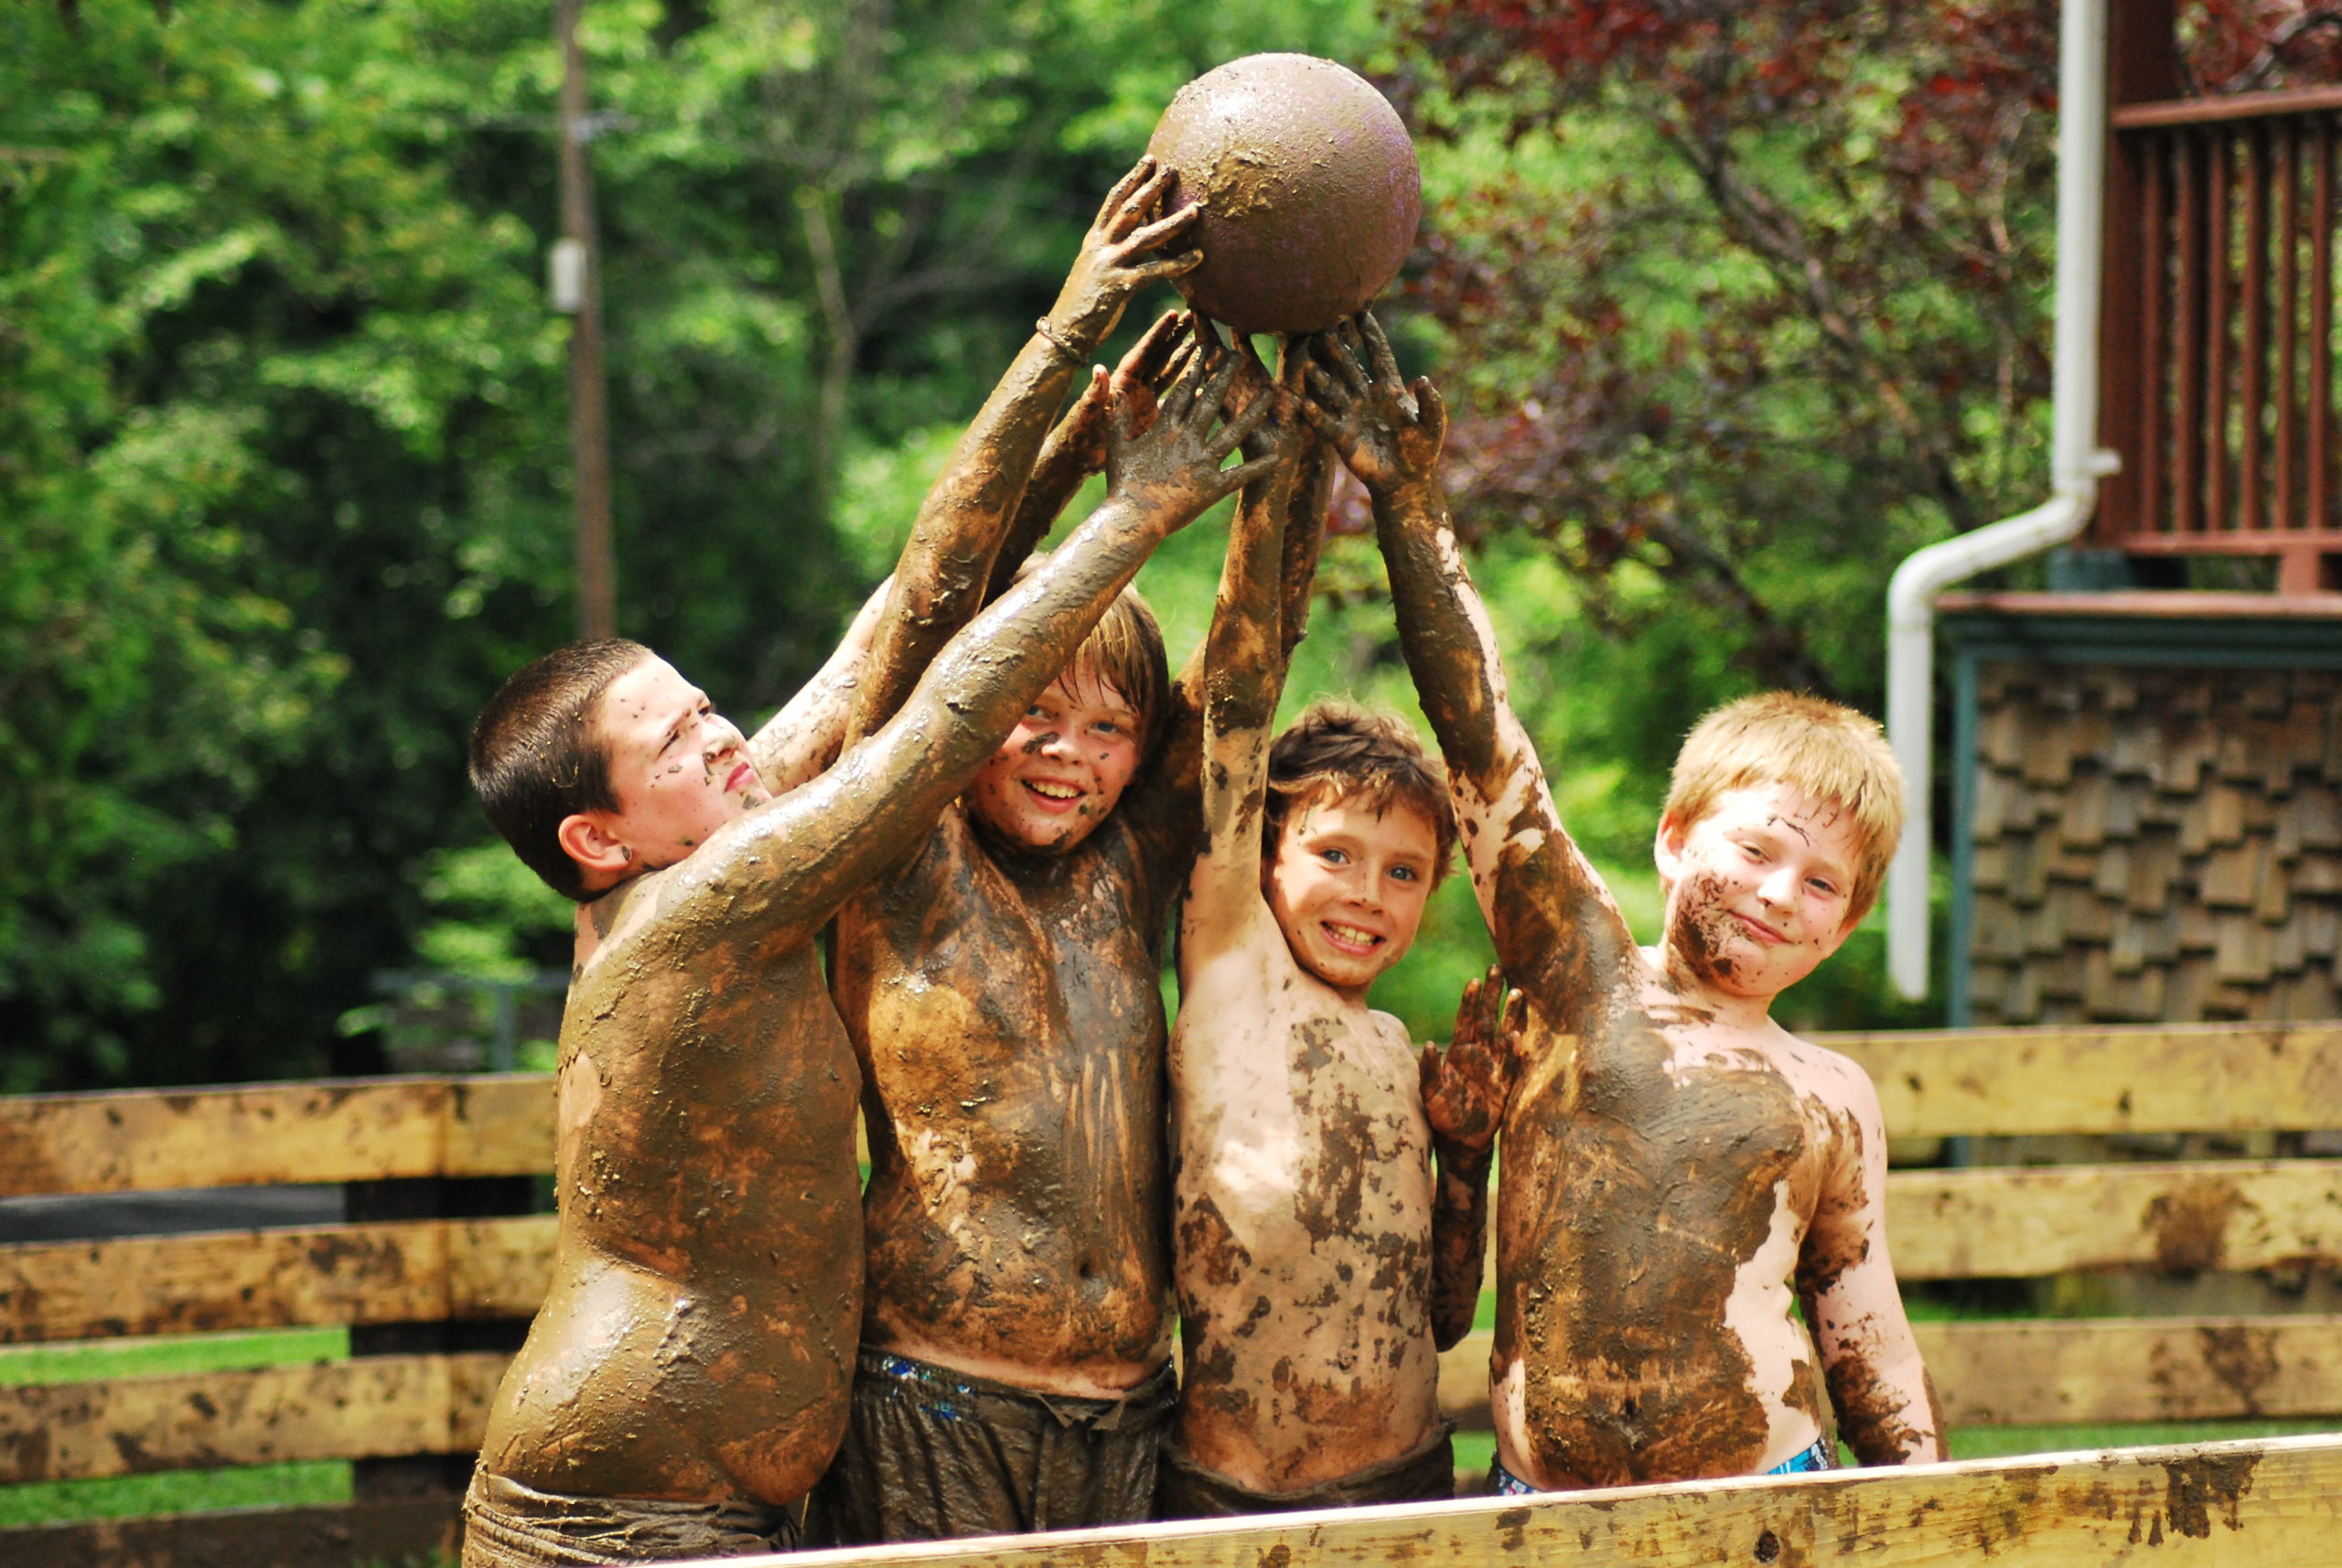 Muddy campers holding up a ball